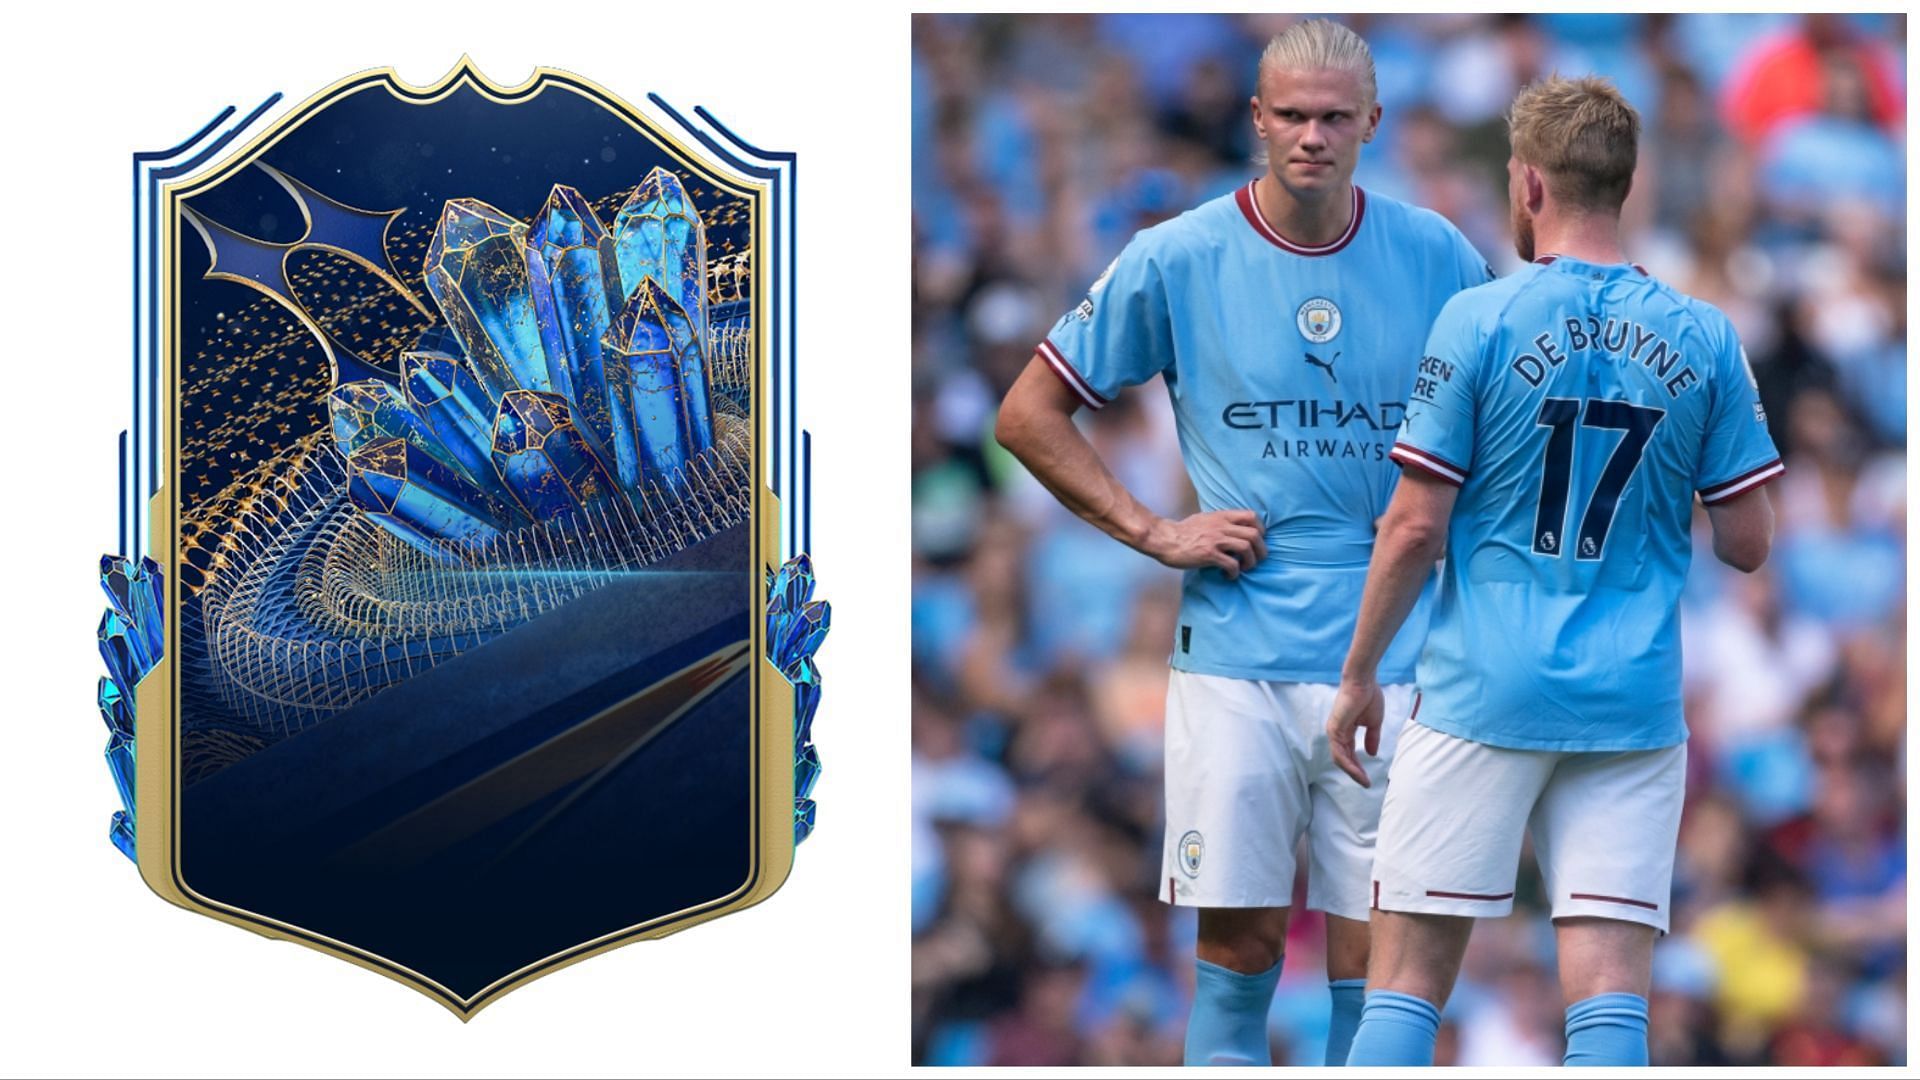 Premier League TOTS nominees have been revealed (Images via EA Sports and Getty)